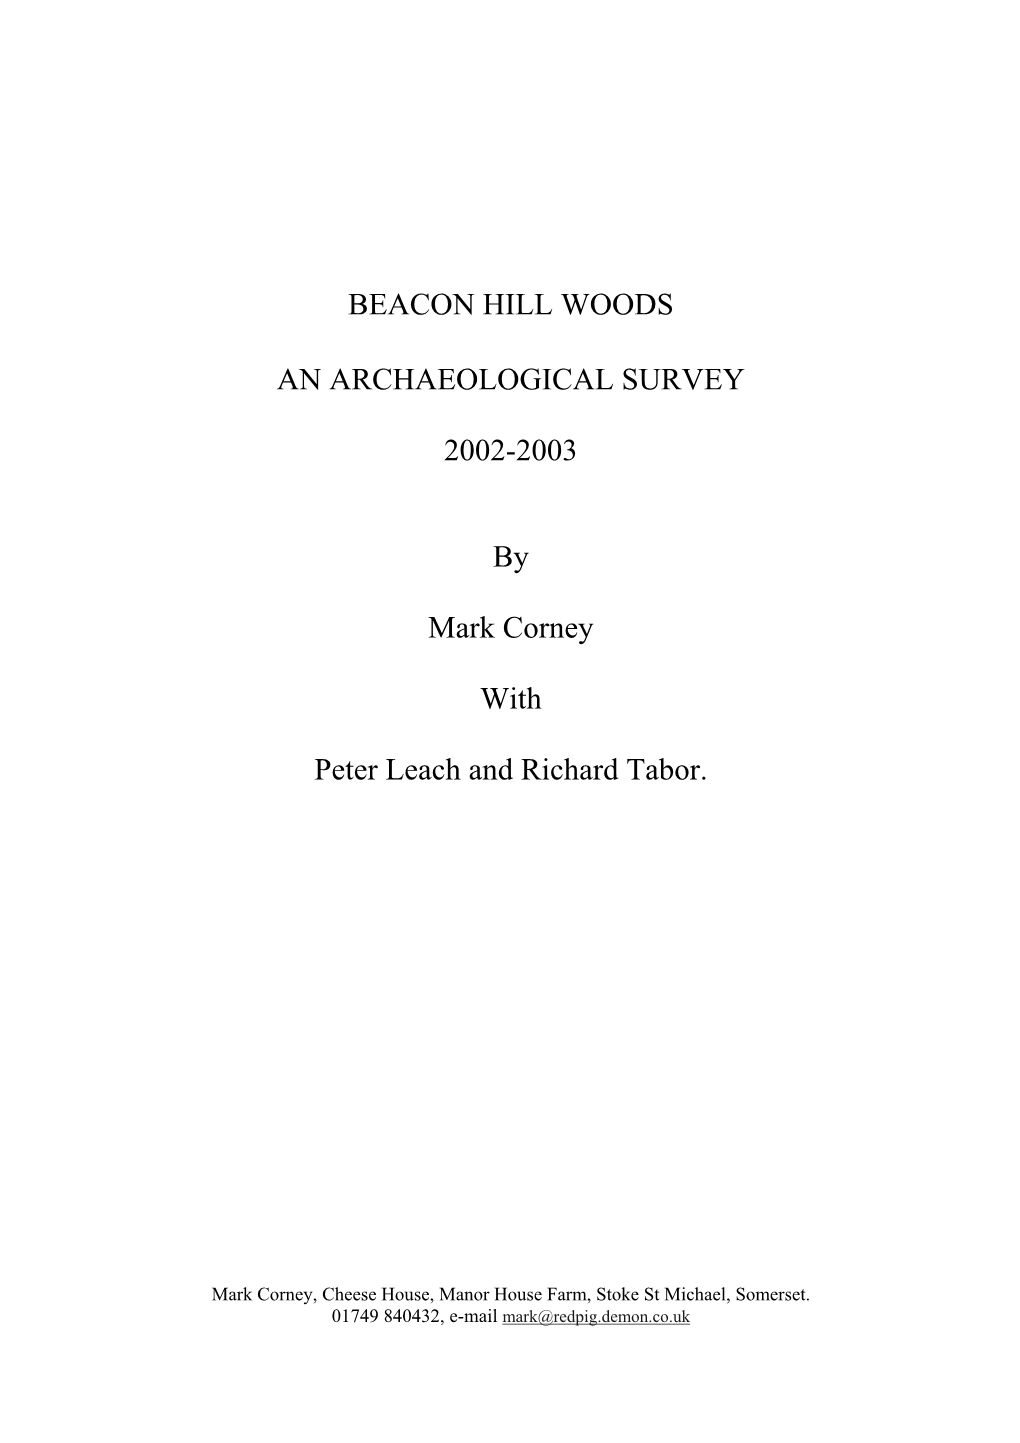 BEACON HILL WOODS an ARCHAEOLOGICAL SURVEY 2002-2003 by Mark Corney with Peter Leach and Richard Tabor